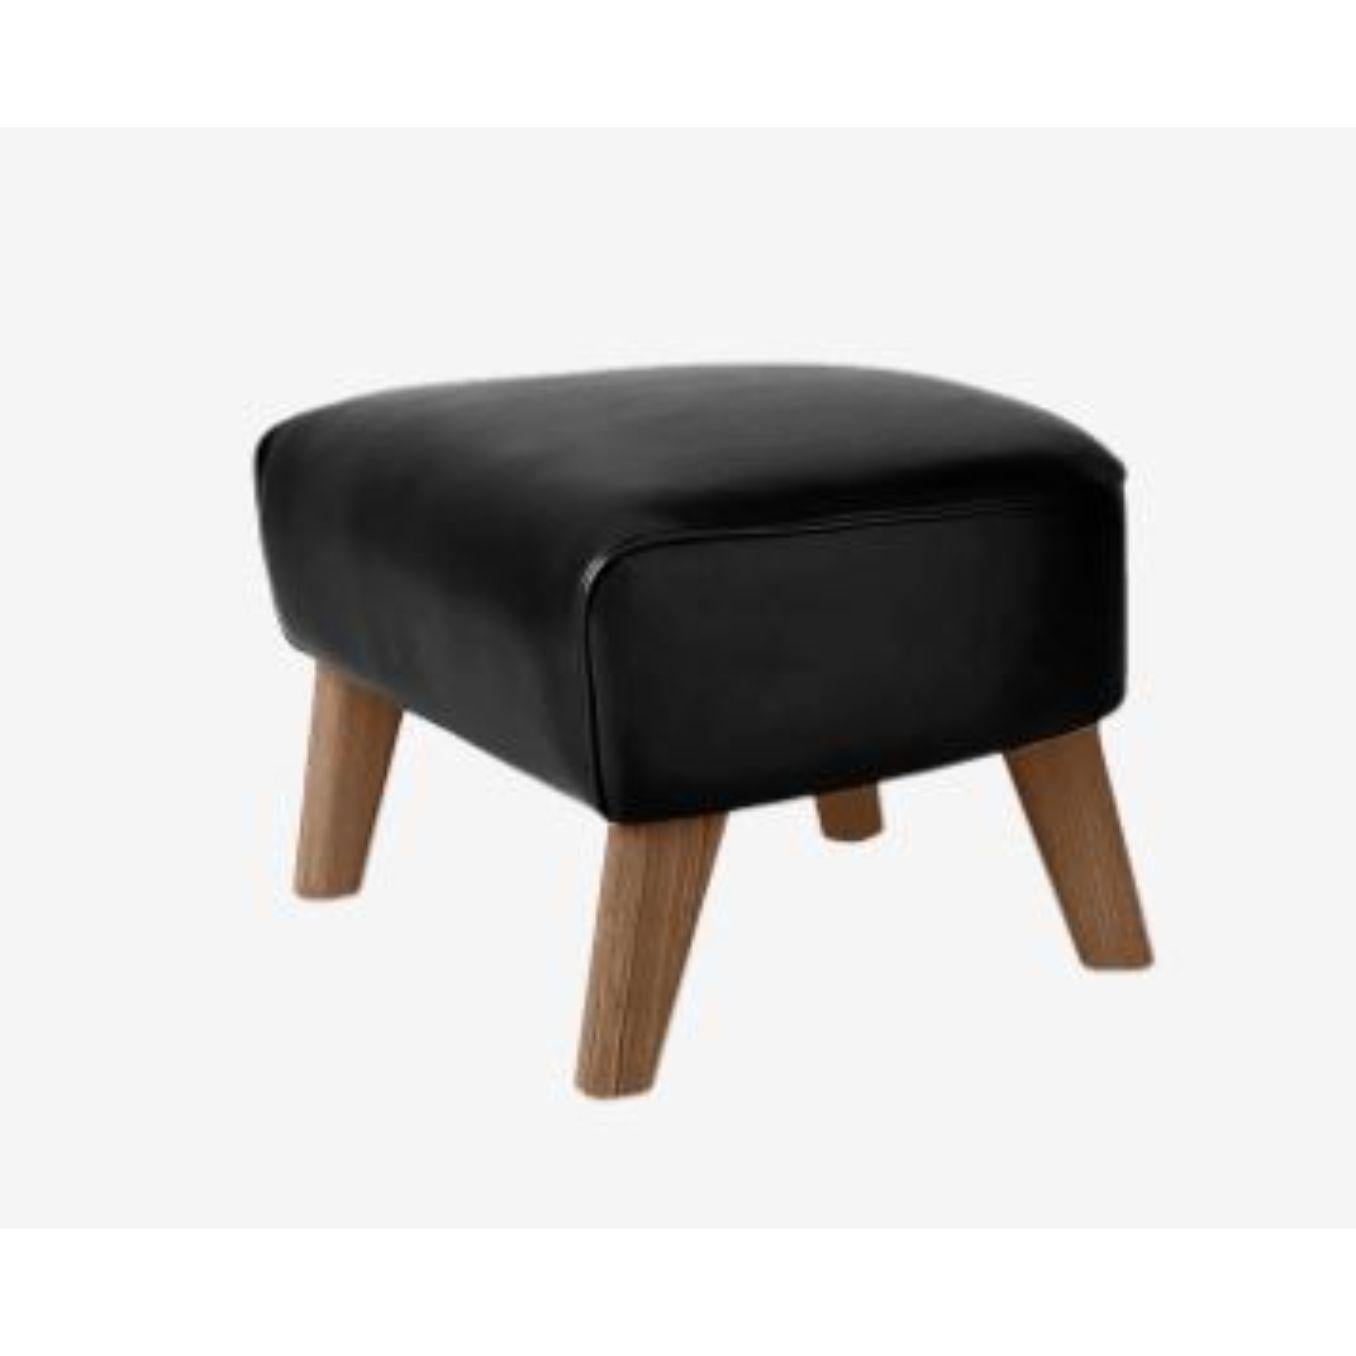 Nevada black 0500S my own chair footsool by Lassen
Dimensions: D 58 x W 56 x H 40 cm 
Materials: textile, smoked oak, 
Also available in different colors and materials. 
Weight: 18 Kg

The My Own Chair Footstool has been designed in the same